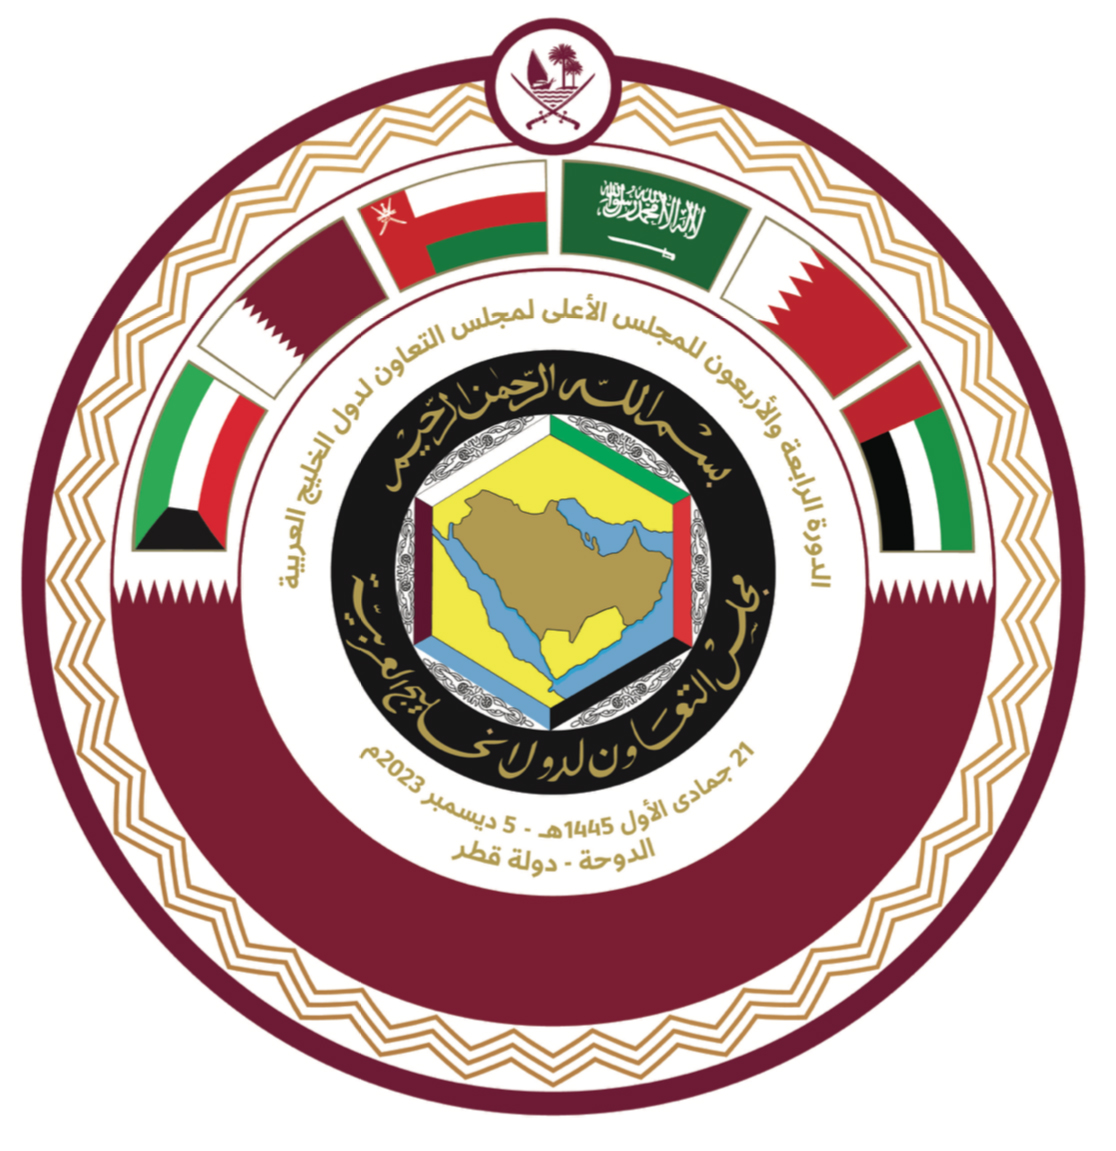 The 44th edition of the GCC summit